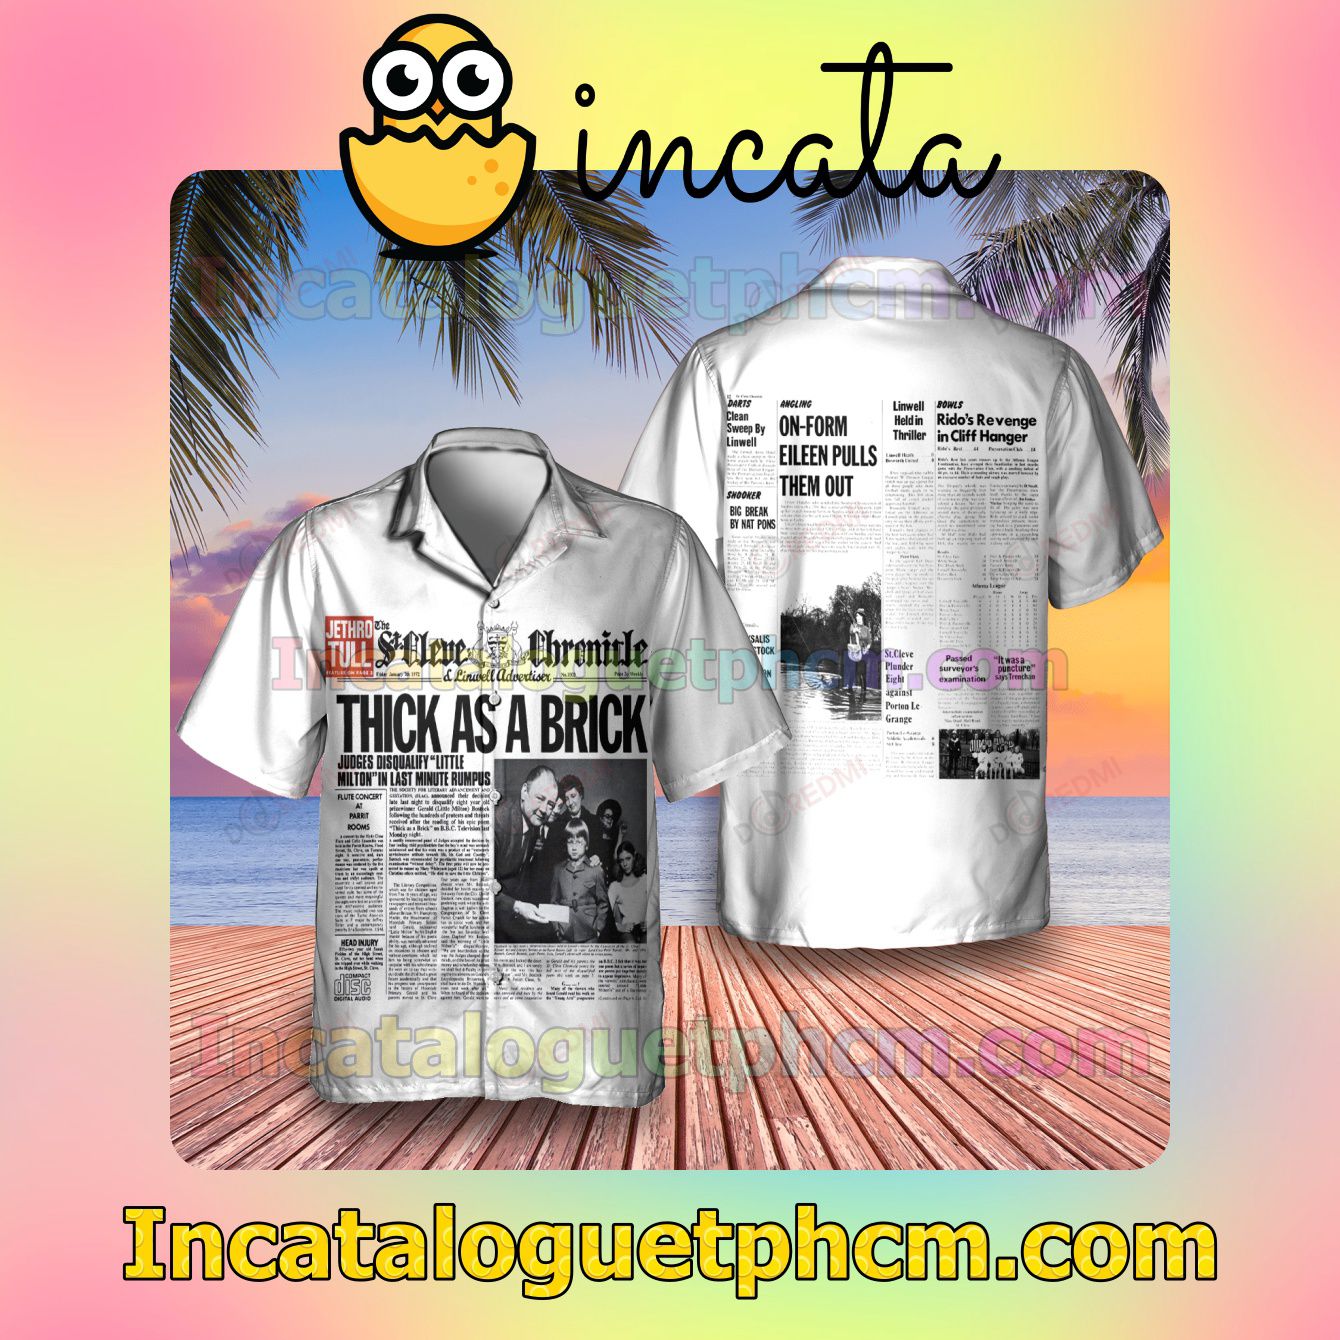 Jethro Tull Thick As A Brick Album Cover White Men Vacation Shirts